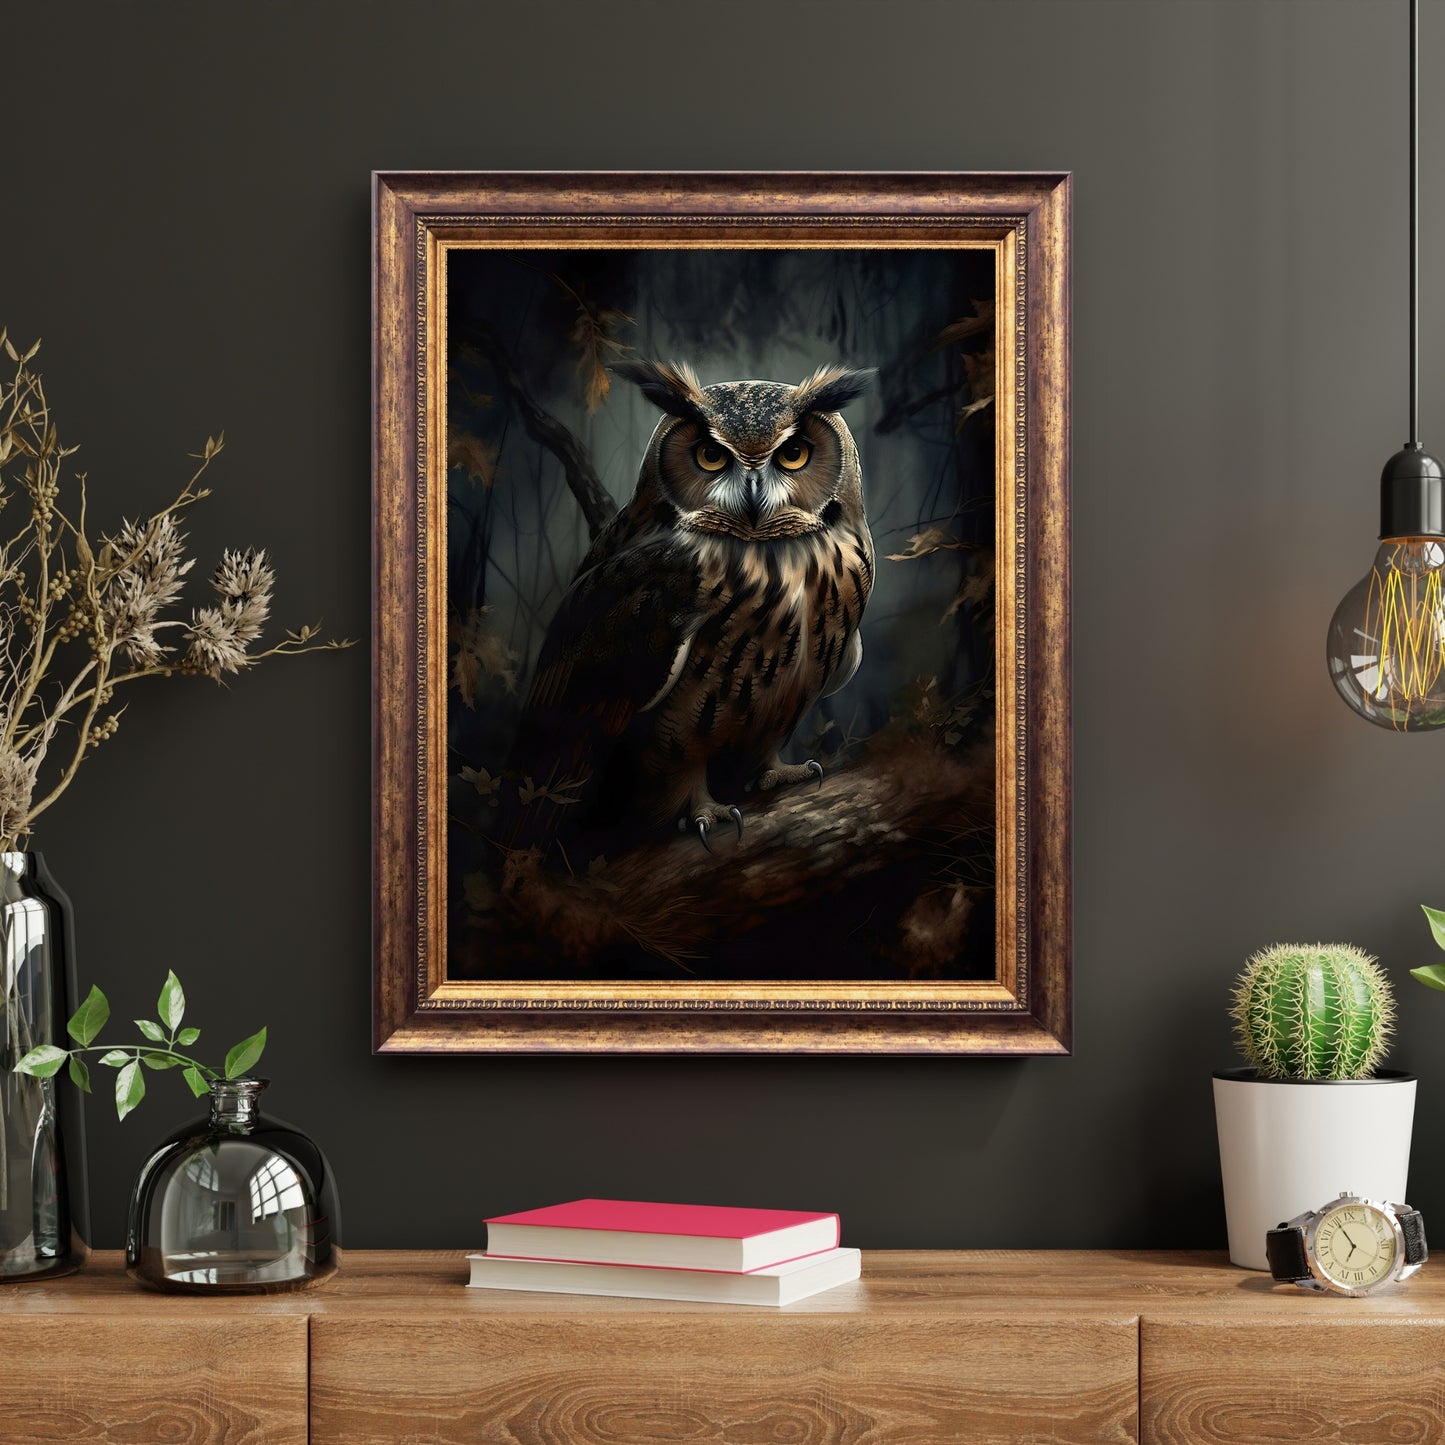 Owl in Dark Forest Wall Art Dark Academia, Goblincore, Victorian, Moody Antique Painting, Witchy Gothic Cottagecore Decor Paper Poster Prints